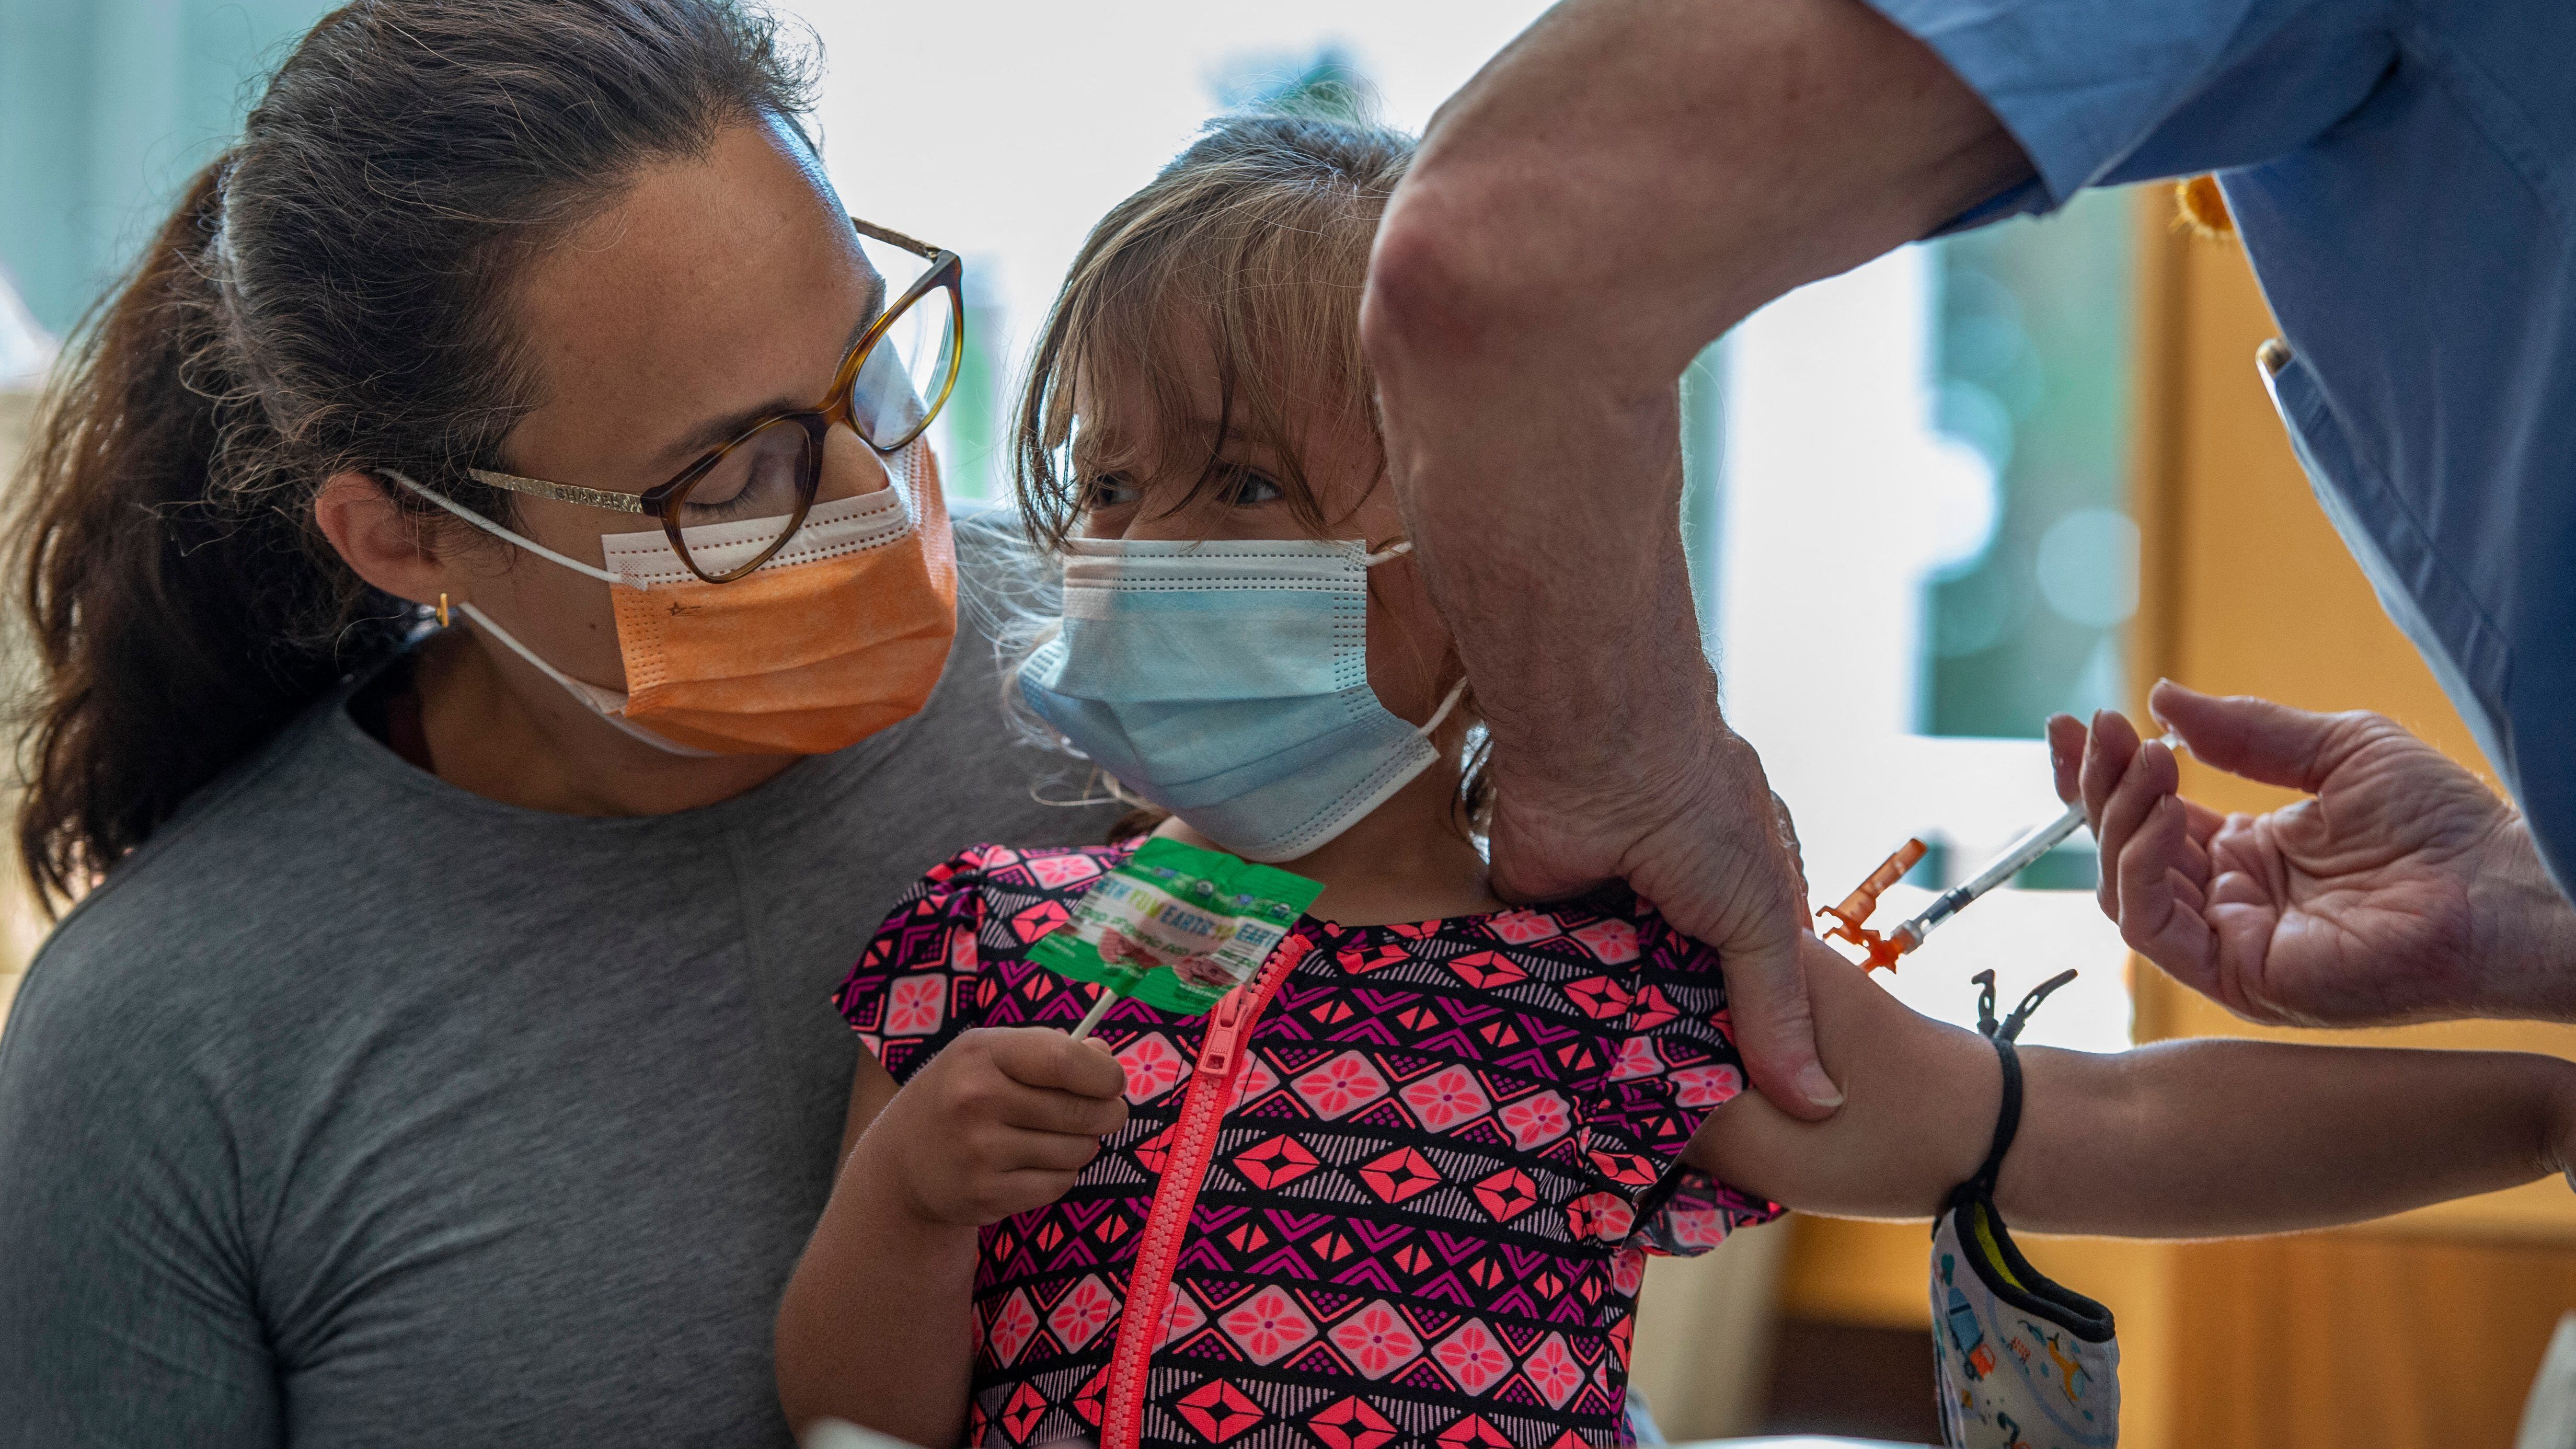 [From left to right] A woman in a gray shirt and orange mask holds a child in a pink and blue shirt who is receiving a shot. The child is holding a lollipop while a medical professional in blue gloves holds her right arm.